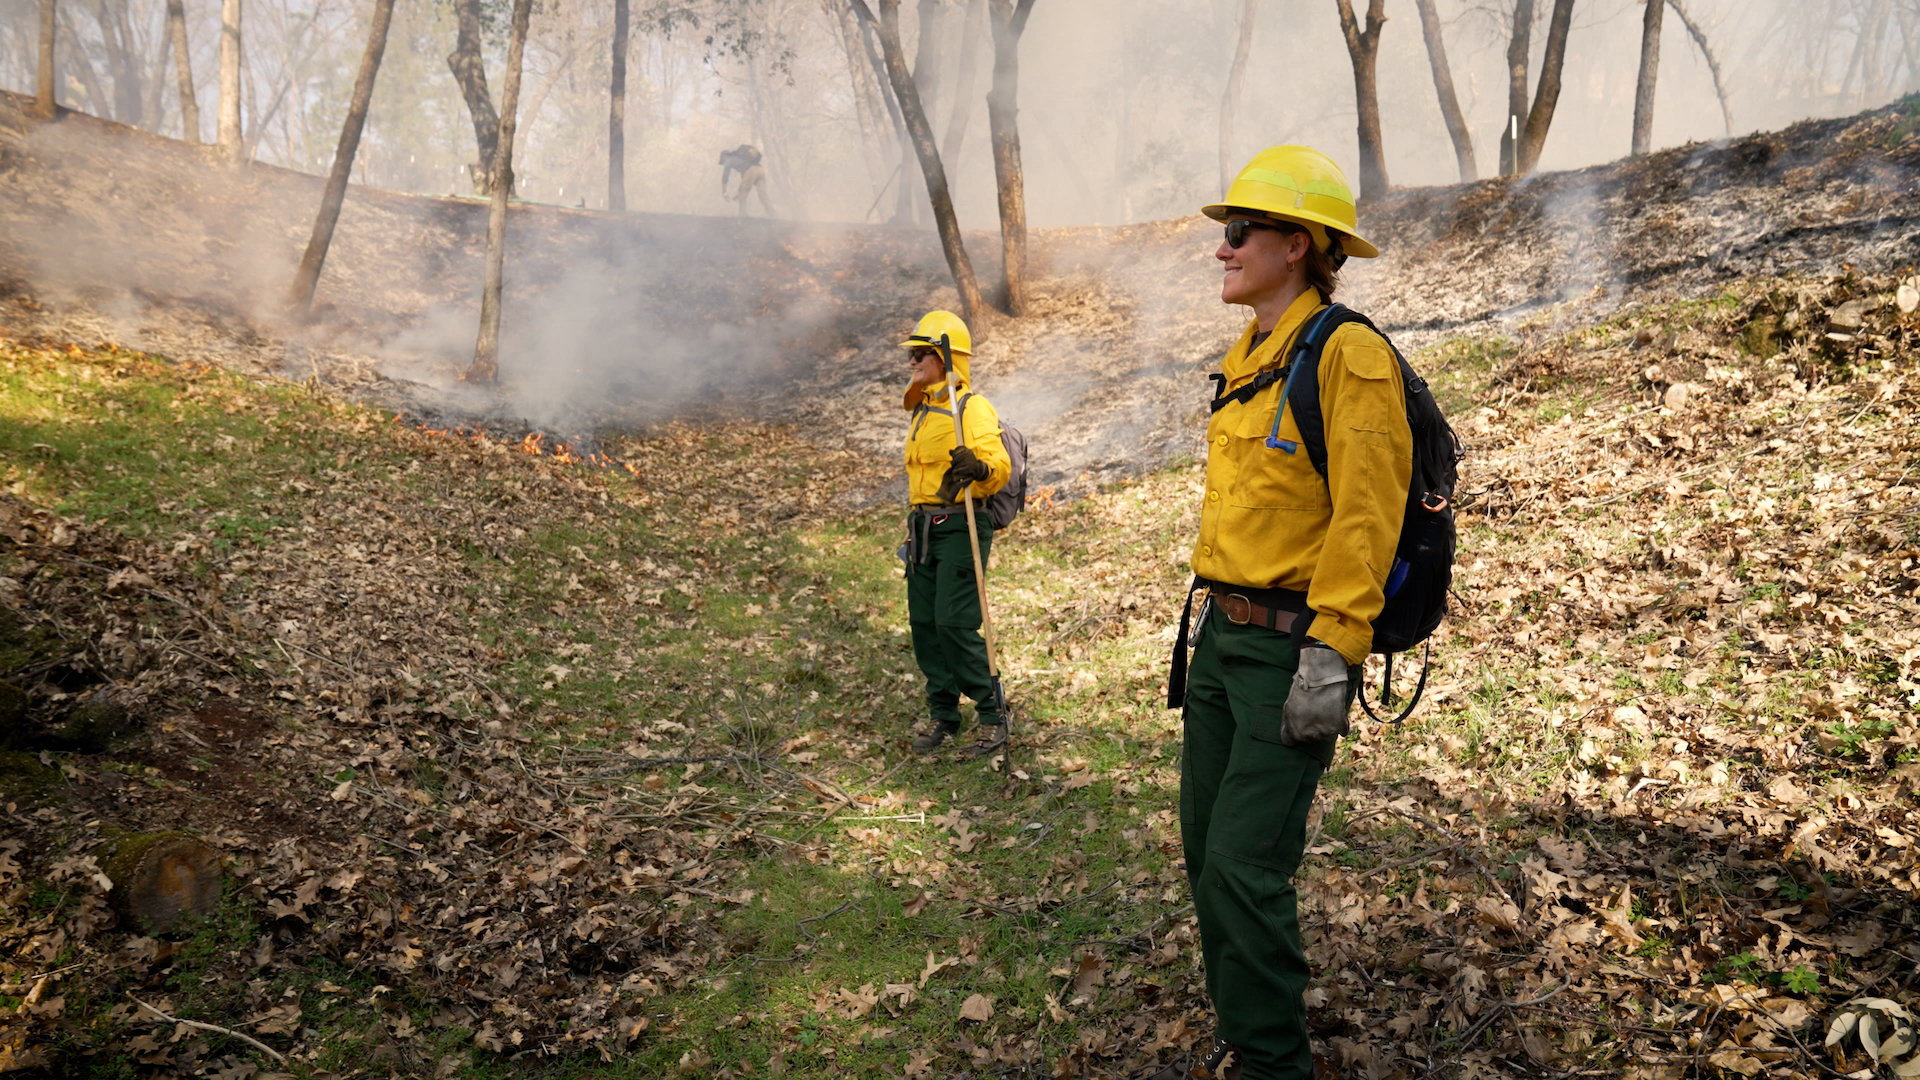 From left, Yoshi Maezumi and Rebecca Wayman of UC Davis stand in Ted Odell’s woods during a prescribed burn on the property. (TIm McConville/UC Davis)